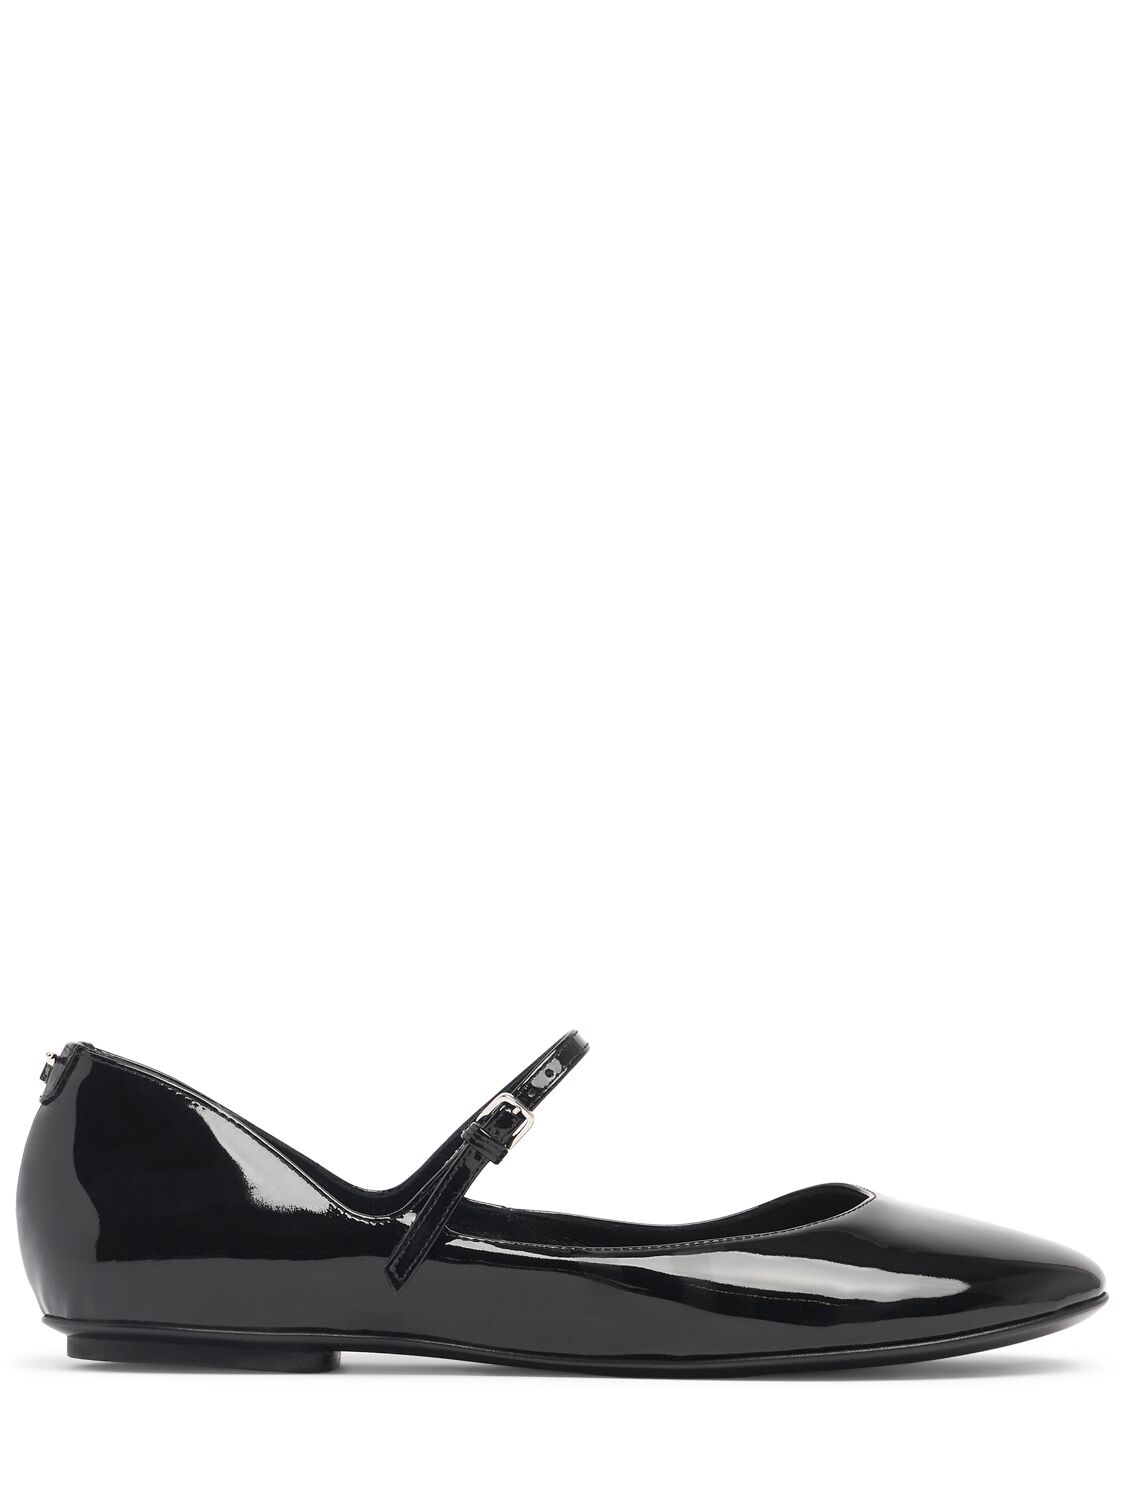 Sergio Rossi 5mm Patent Leather Mary Jane Flats In Black